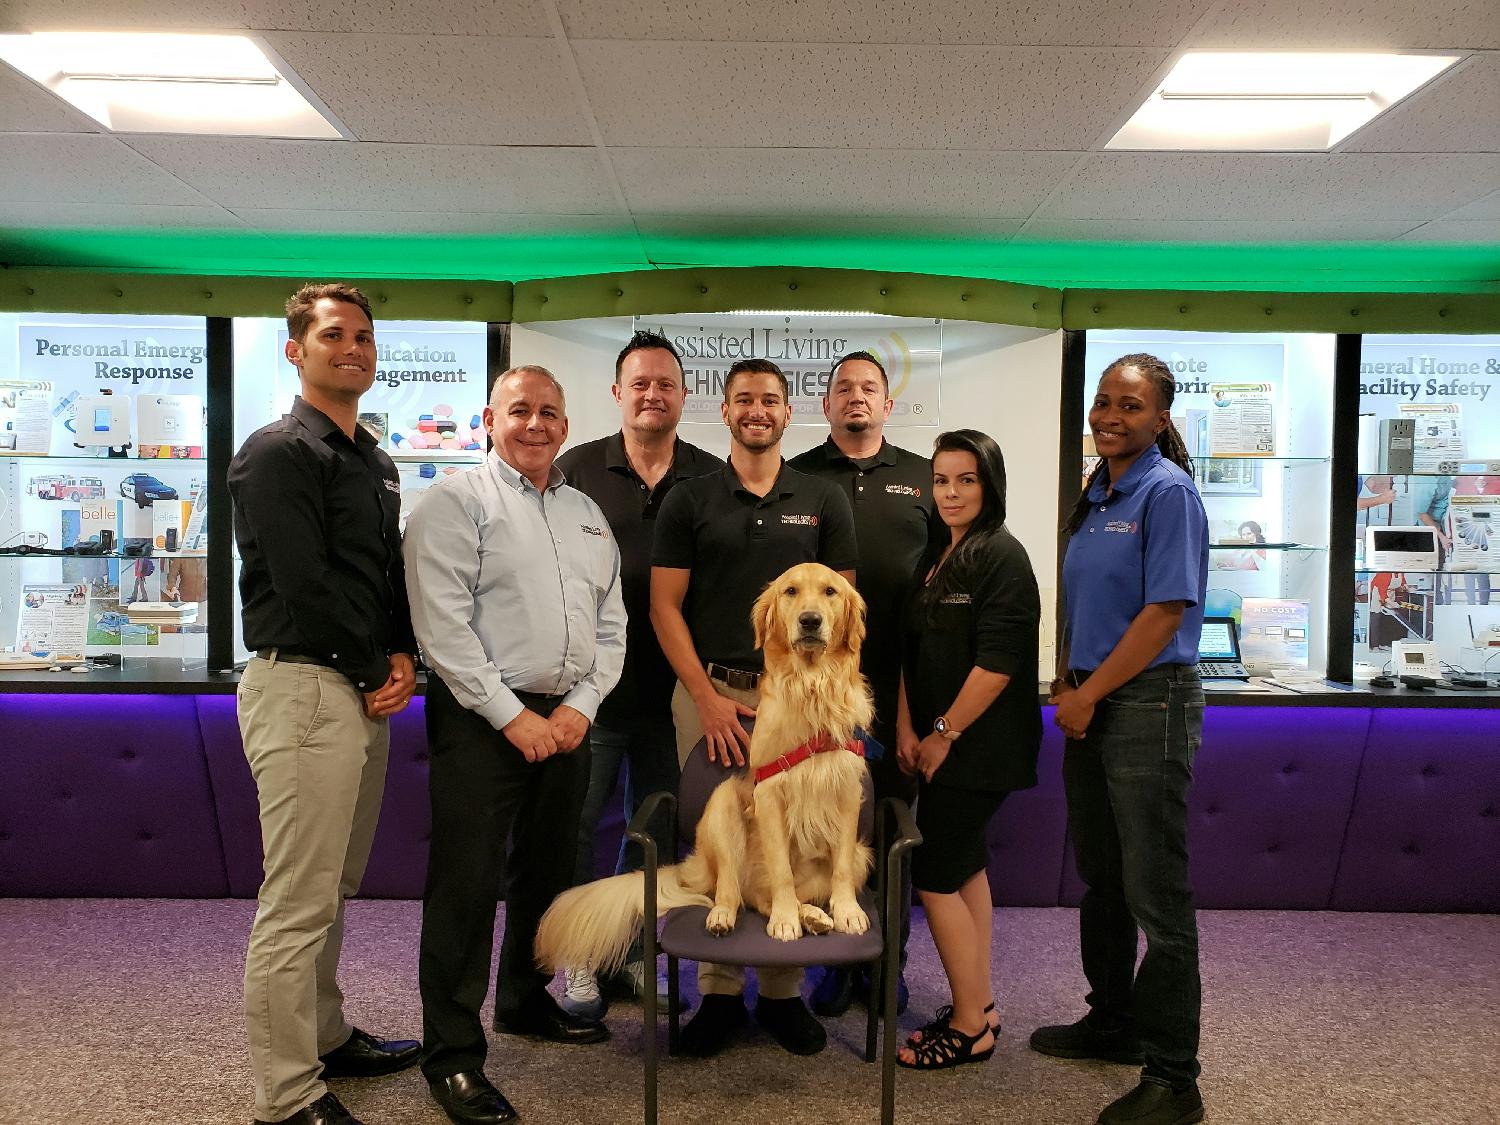 The Assisted Living Technologies Team